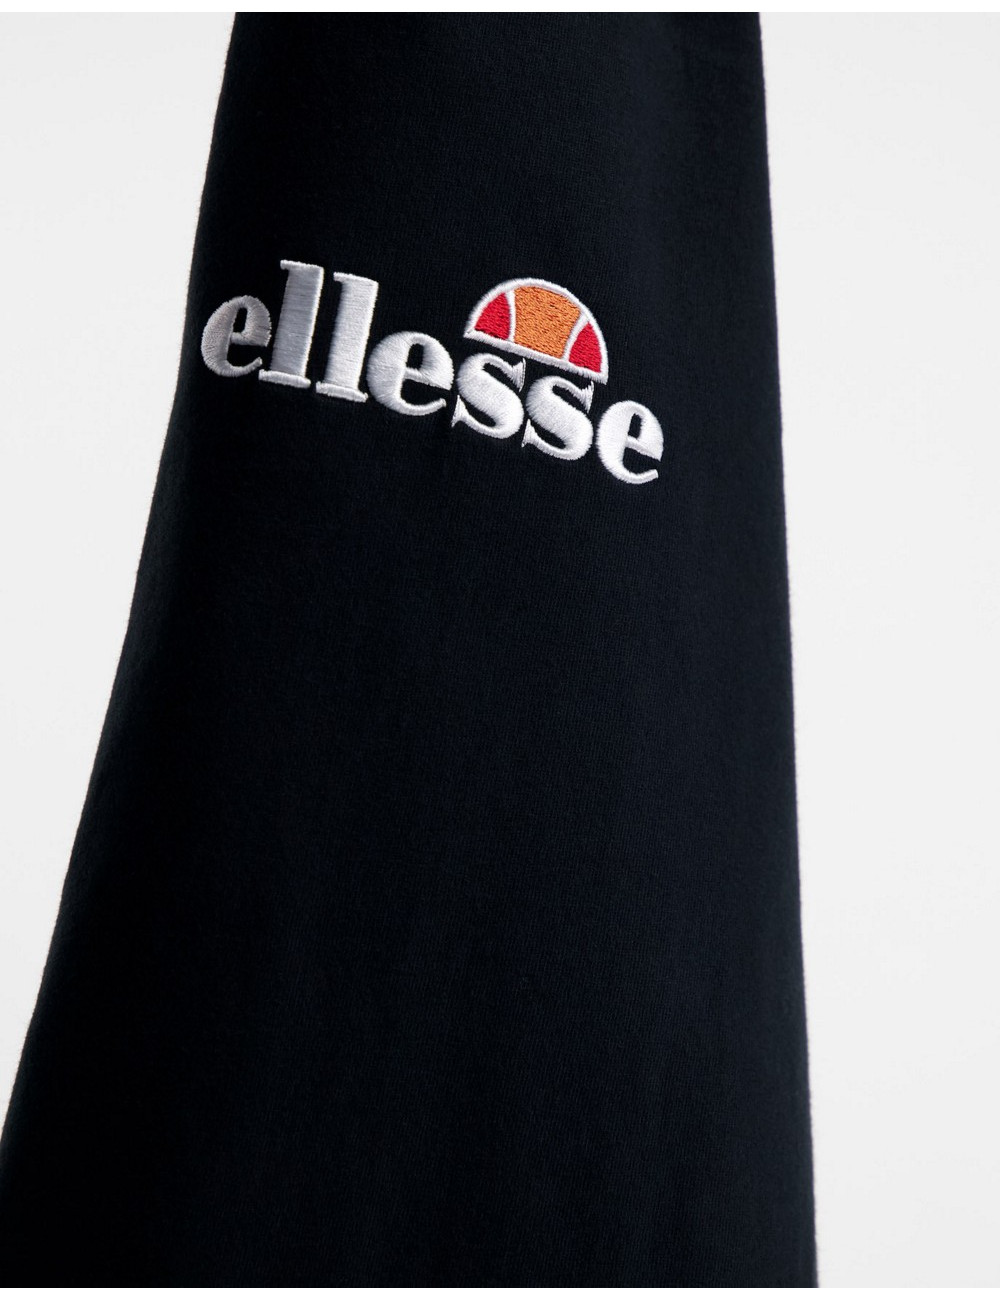 ellesse cropped t-shirt in...